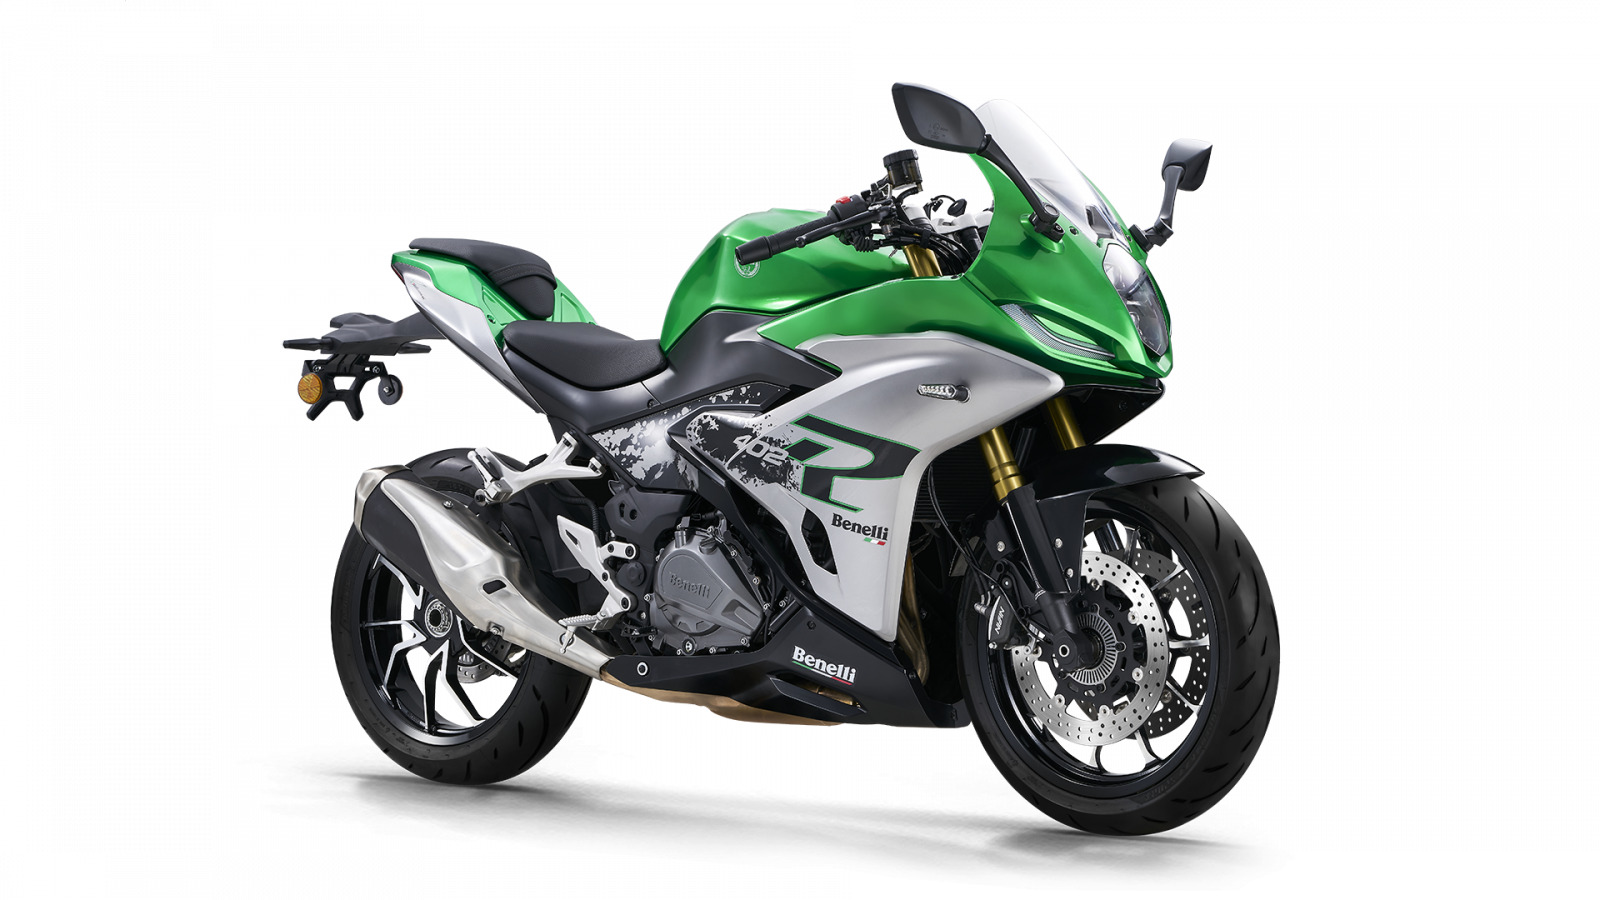 Benelli Tornado 402R Sportbike Makes Official Debut - Price Revealed! - front